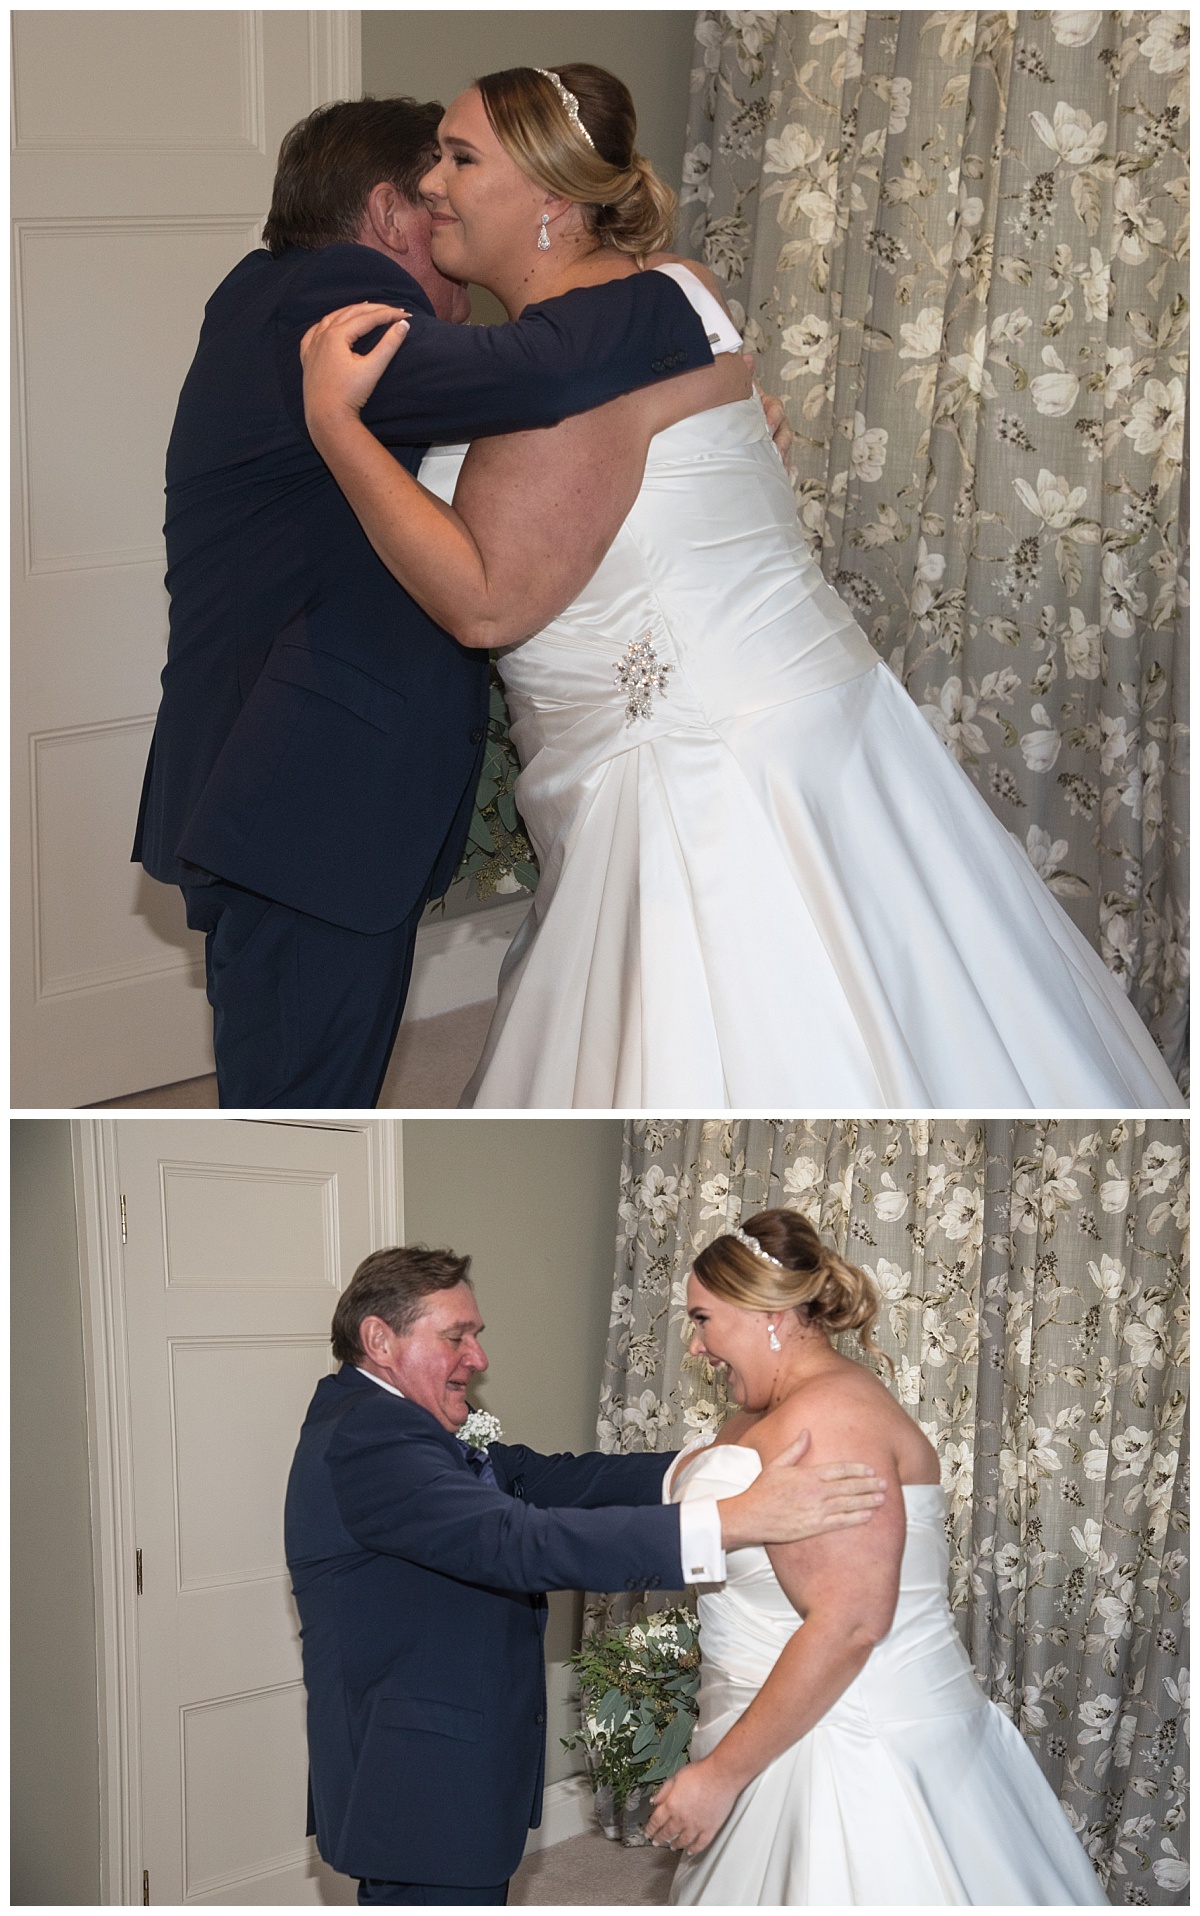 Wedding Photography Manchester - Lorna and Vinny's Abbeywood Estate and Gardens Wedding 31